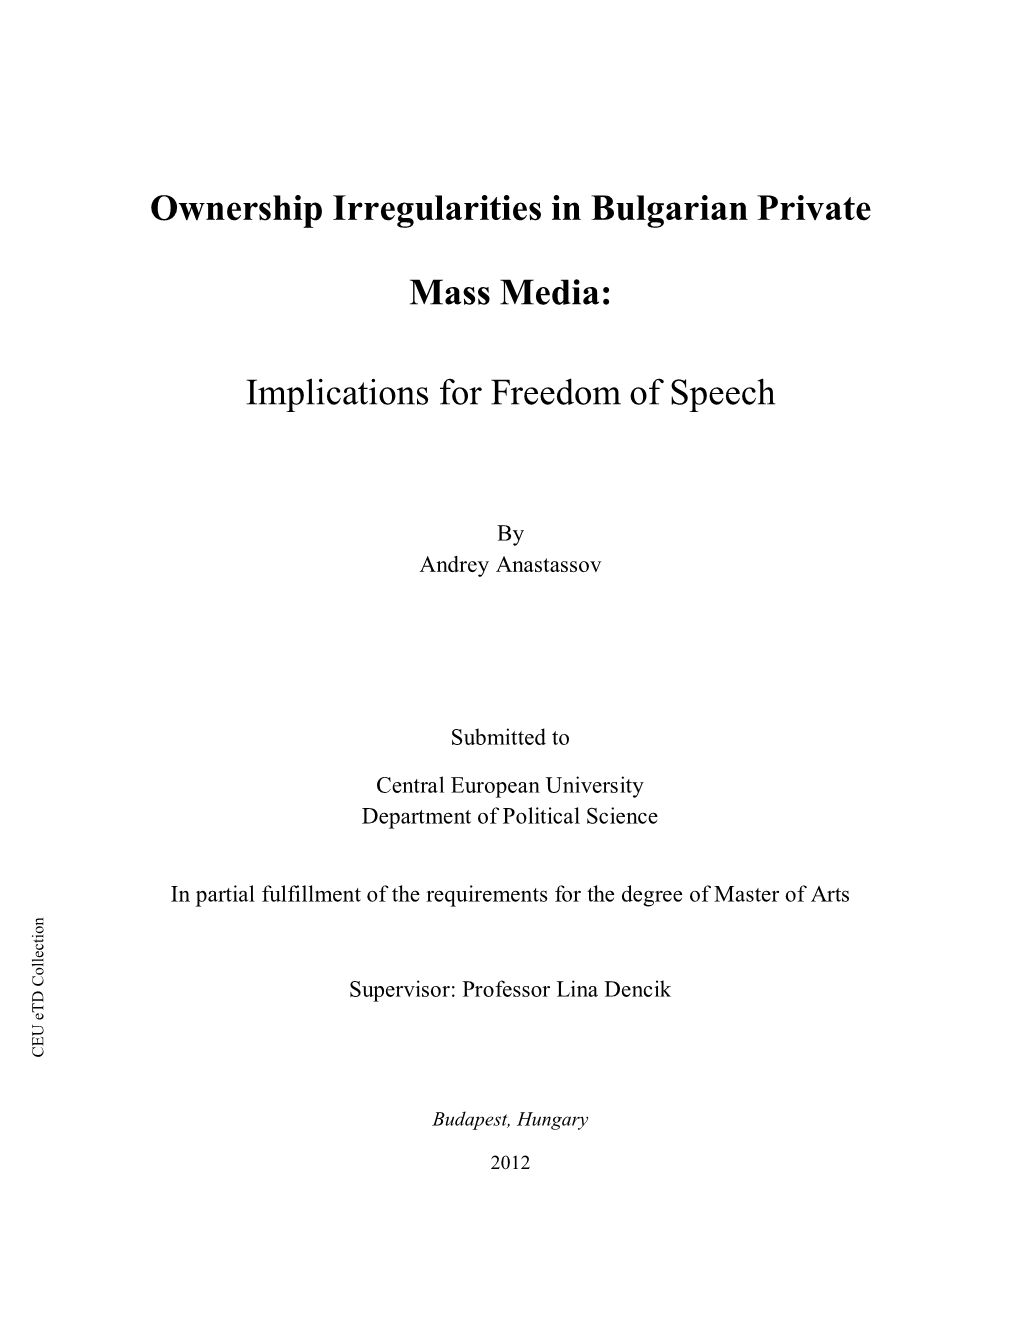 Implications for Freedom of Speech